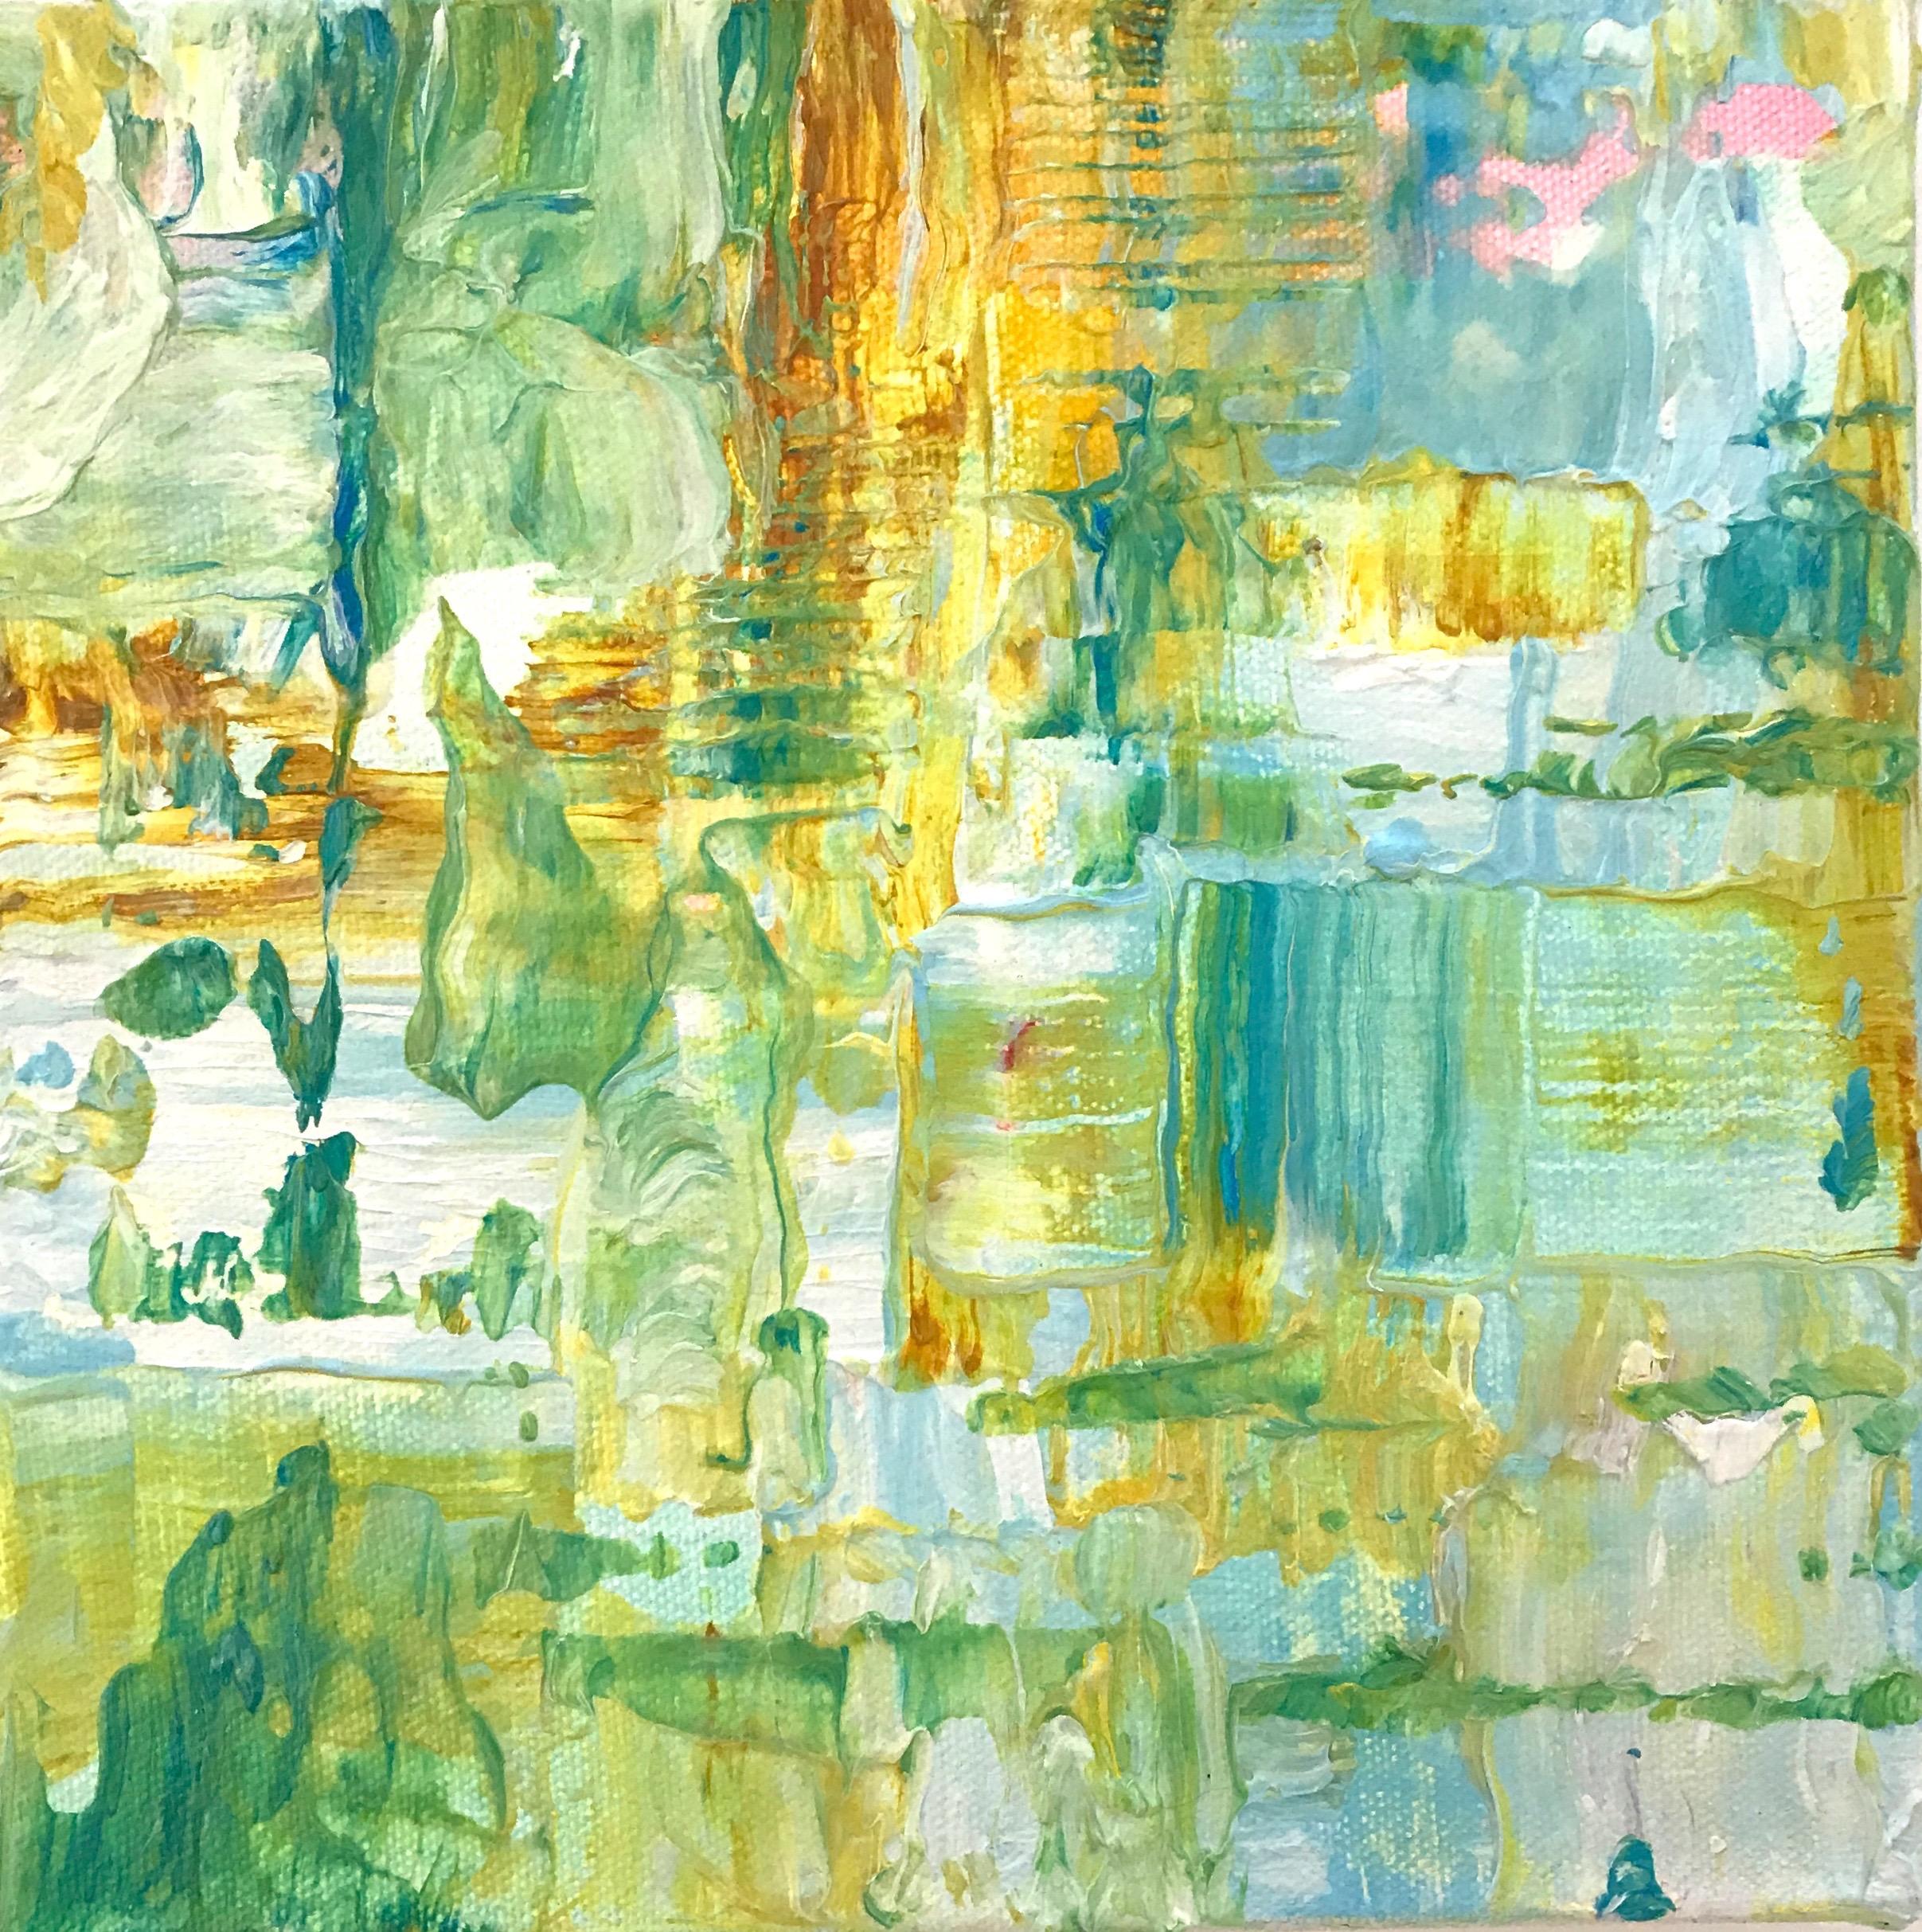 Linda Holt Abstract Painting – "Small Abstract #118, Abstract Expressionist Oil in Greens, Yellow and White"